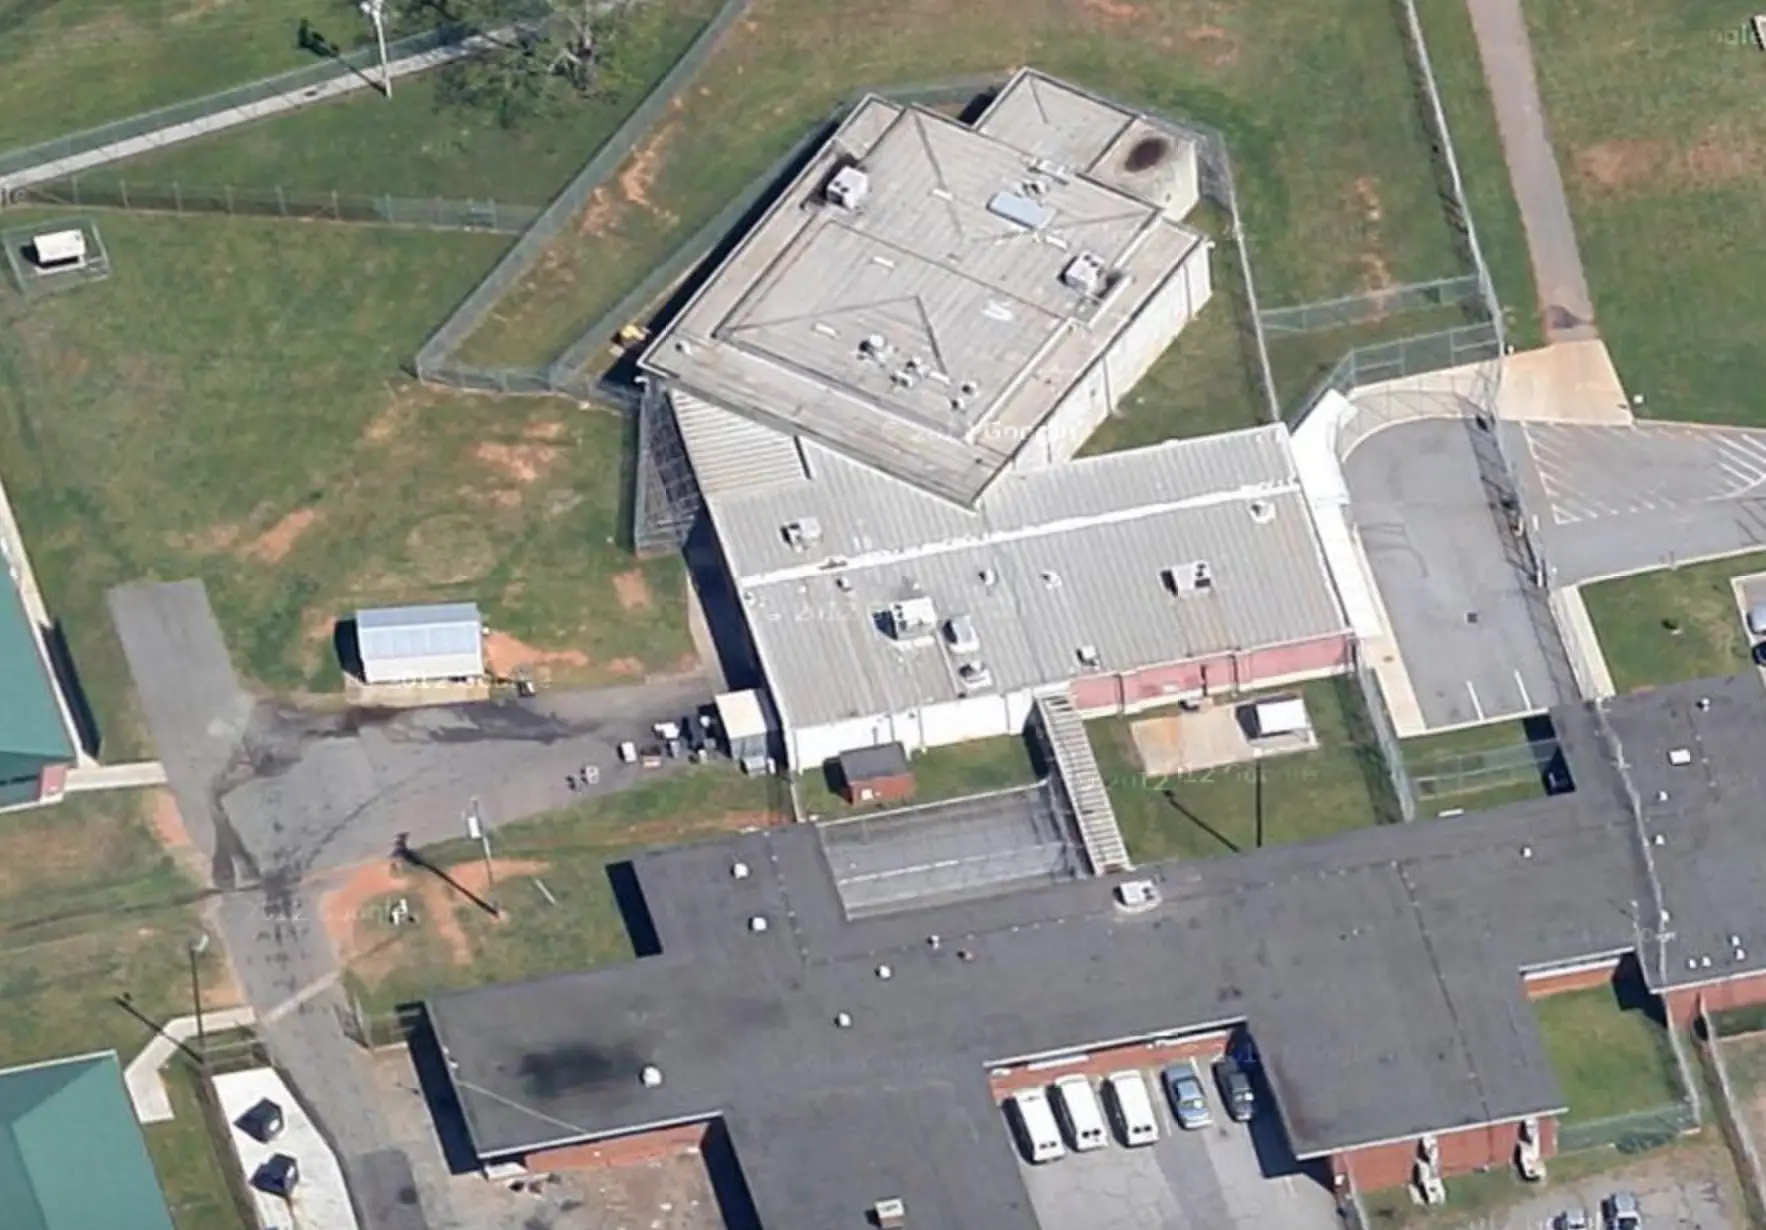 Anderson County Detention Center